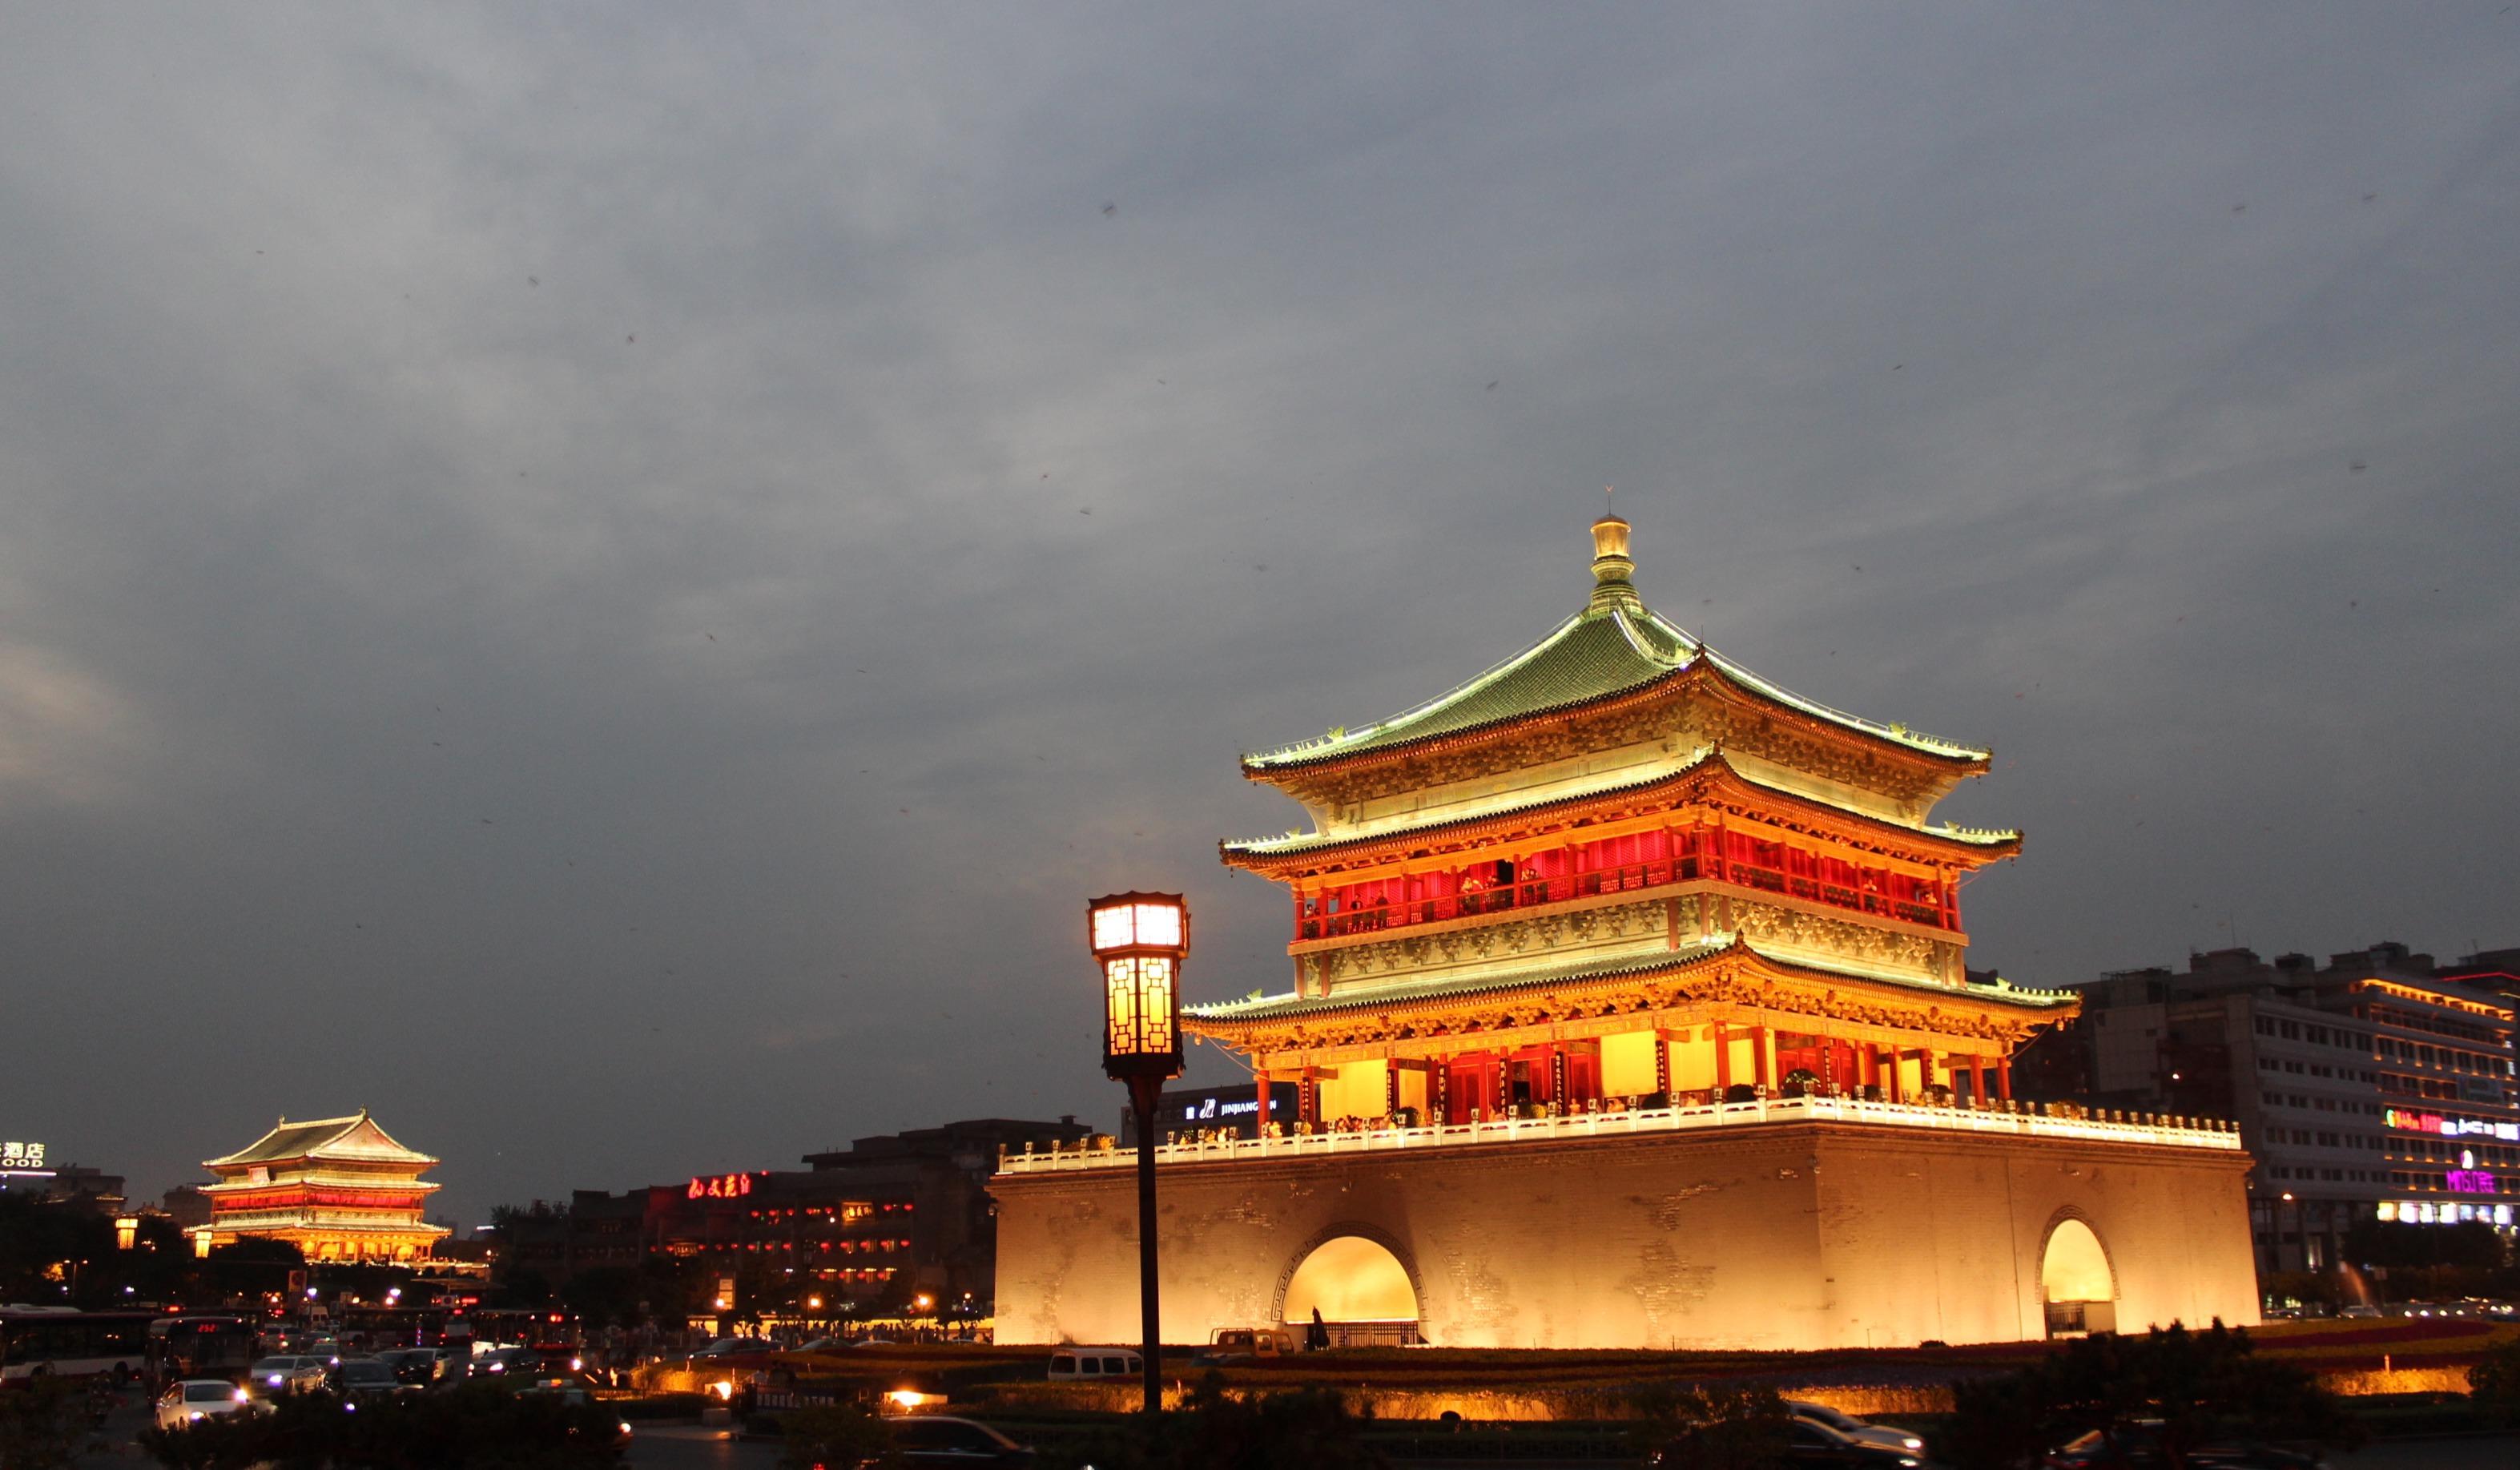 Bell_Tower_and_Drum_Tower,_Xian,_China_-_panoramio